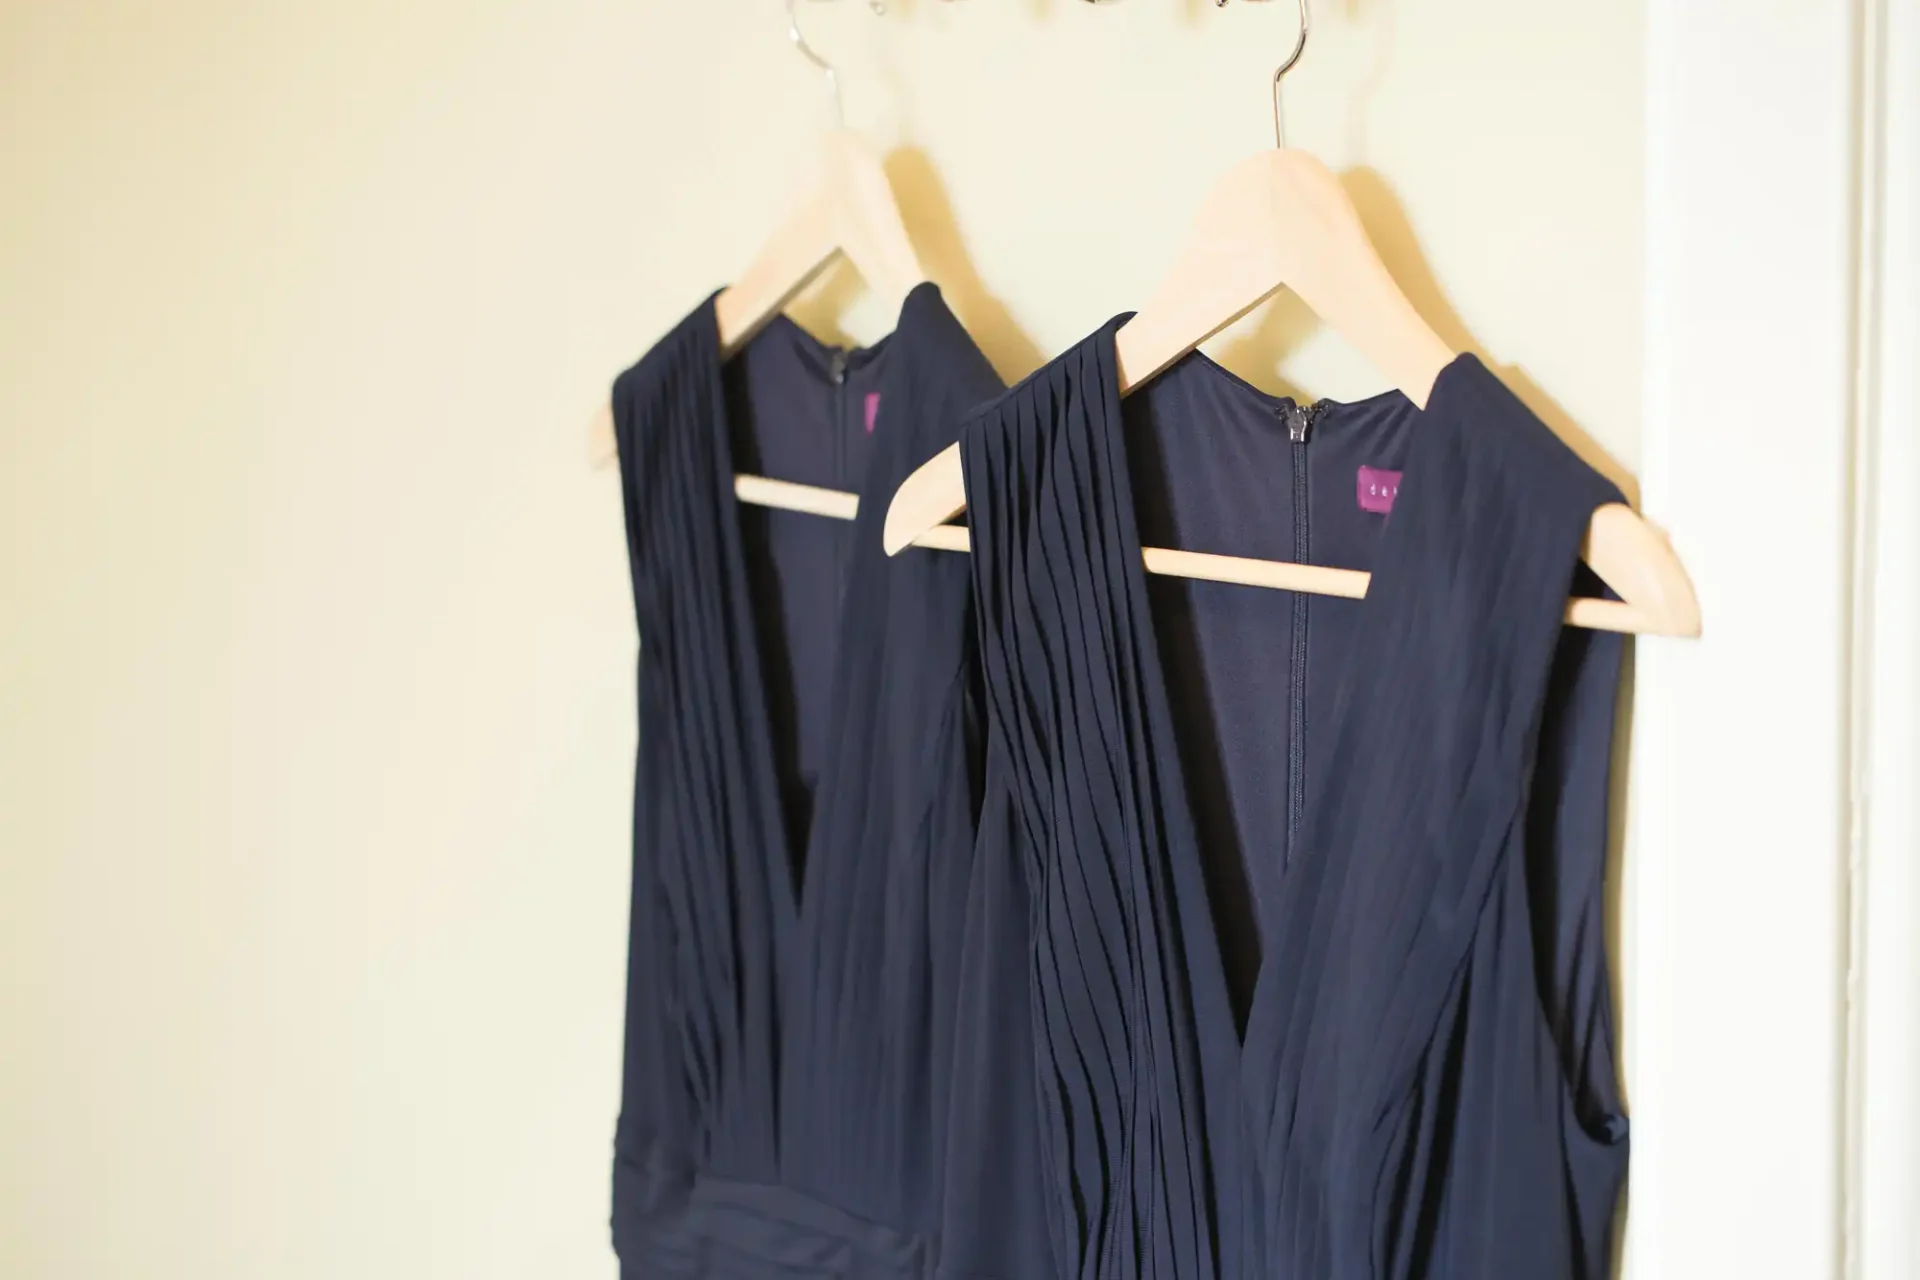 Two navy blue dresses hanging on wooden hangers against a pale yellow background.